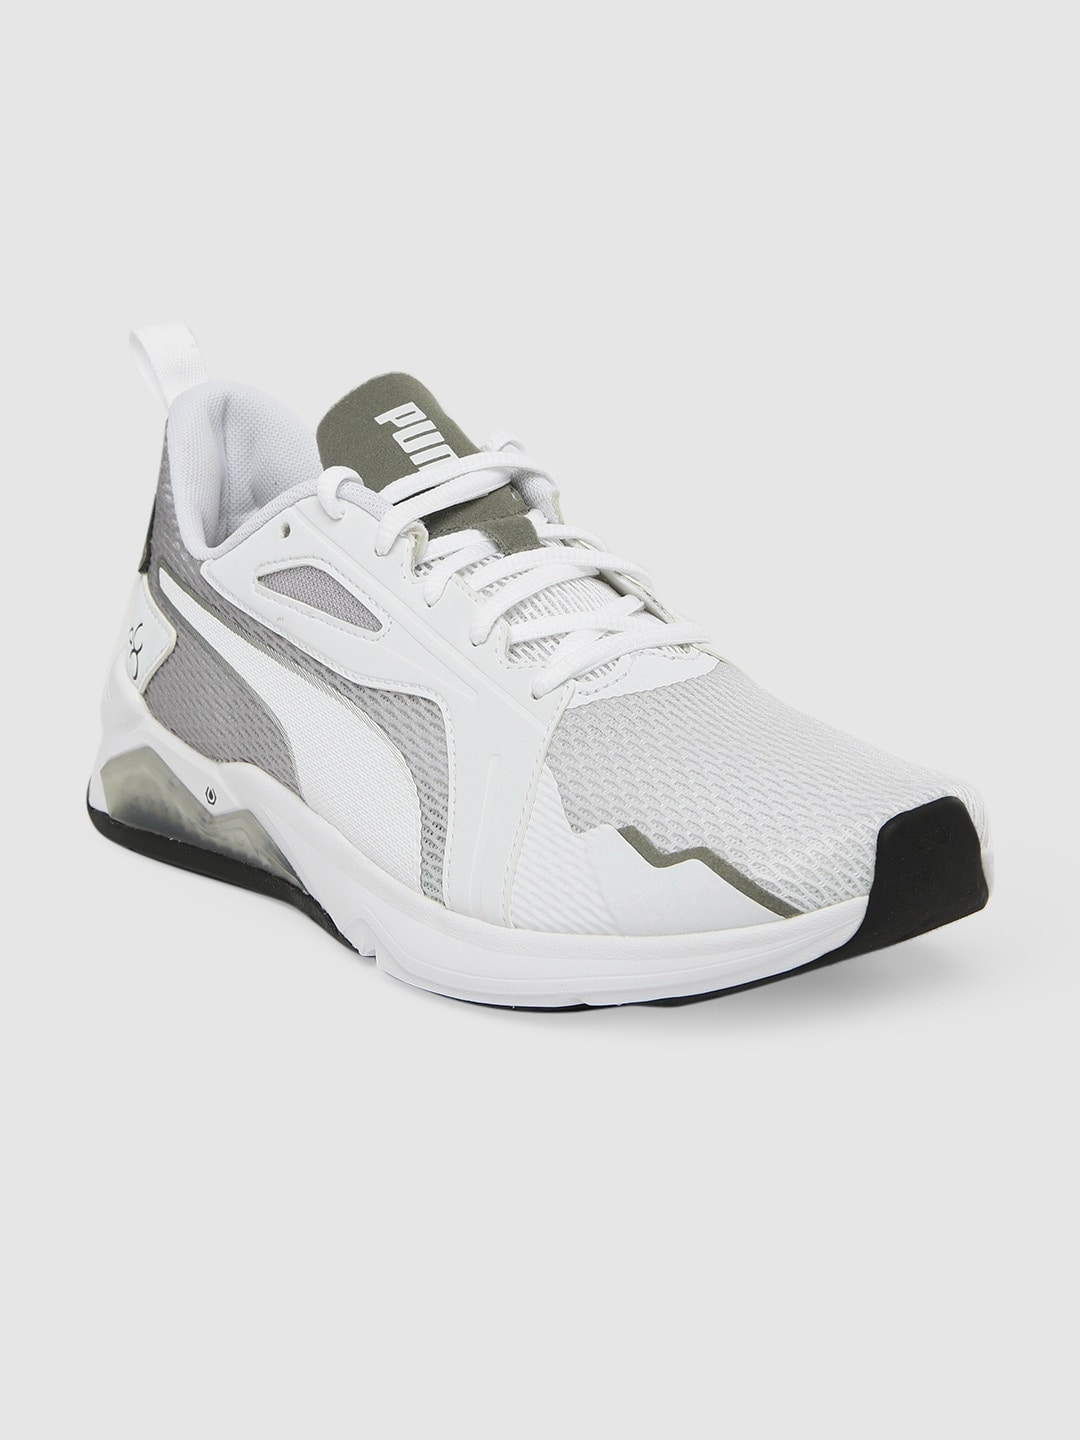 one8 x PUMA Unisex White LQDCELL Method One8 Running Shoes Price in India